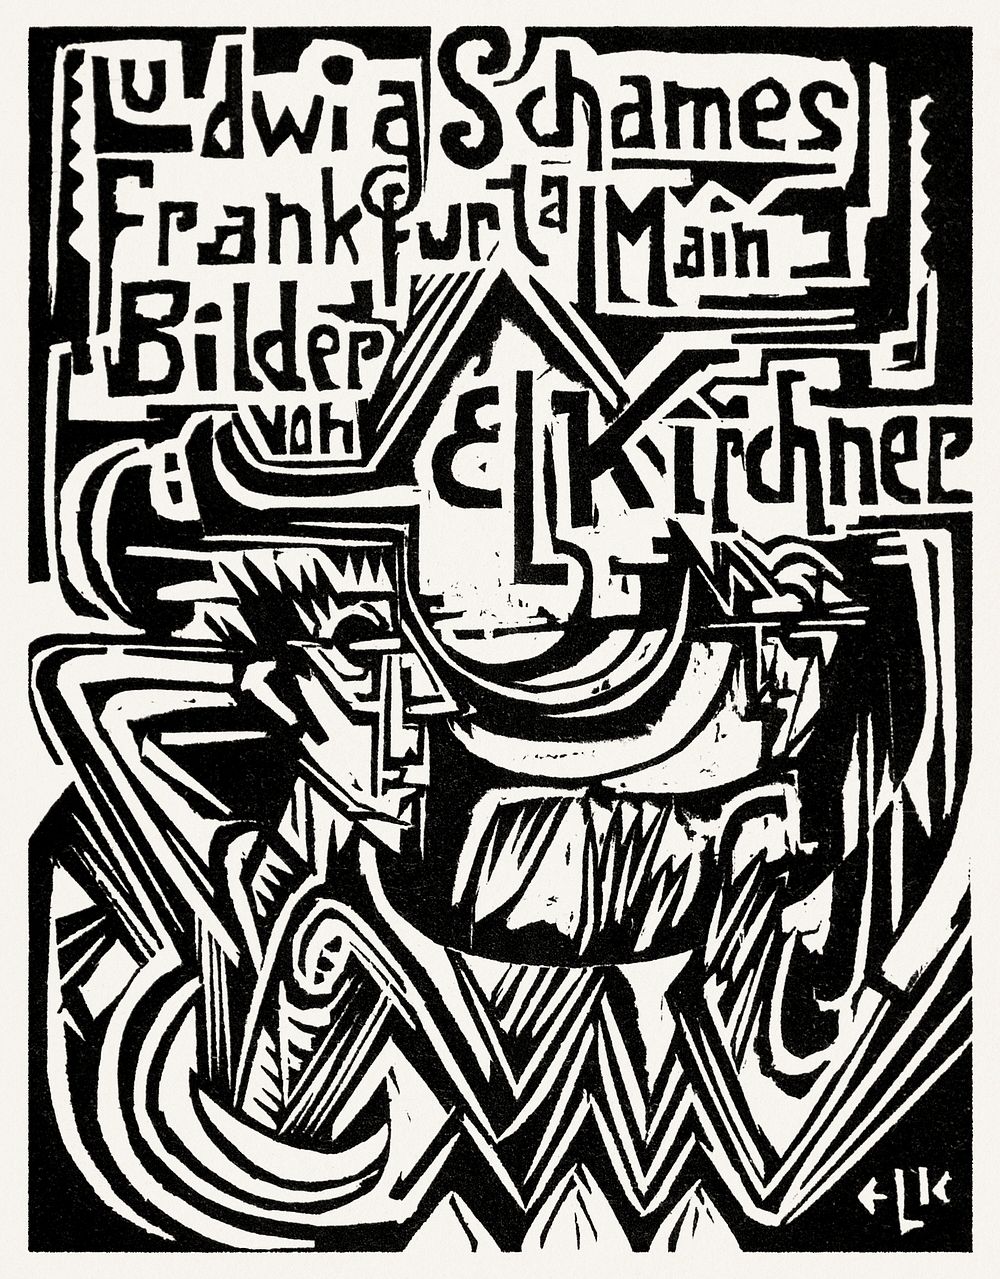 Ludwig Schames, Frankfurt am Main (1919) print in high resolution by Ernst Ludwig Kirchner. Original from The Los Angeles…